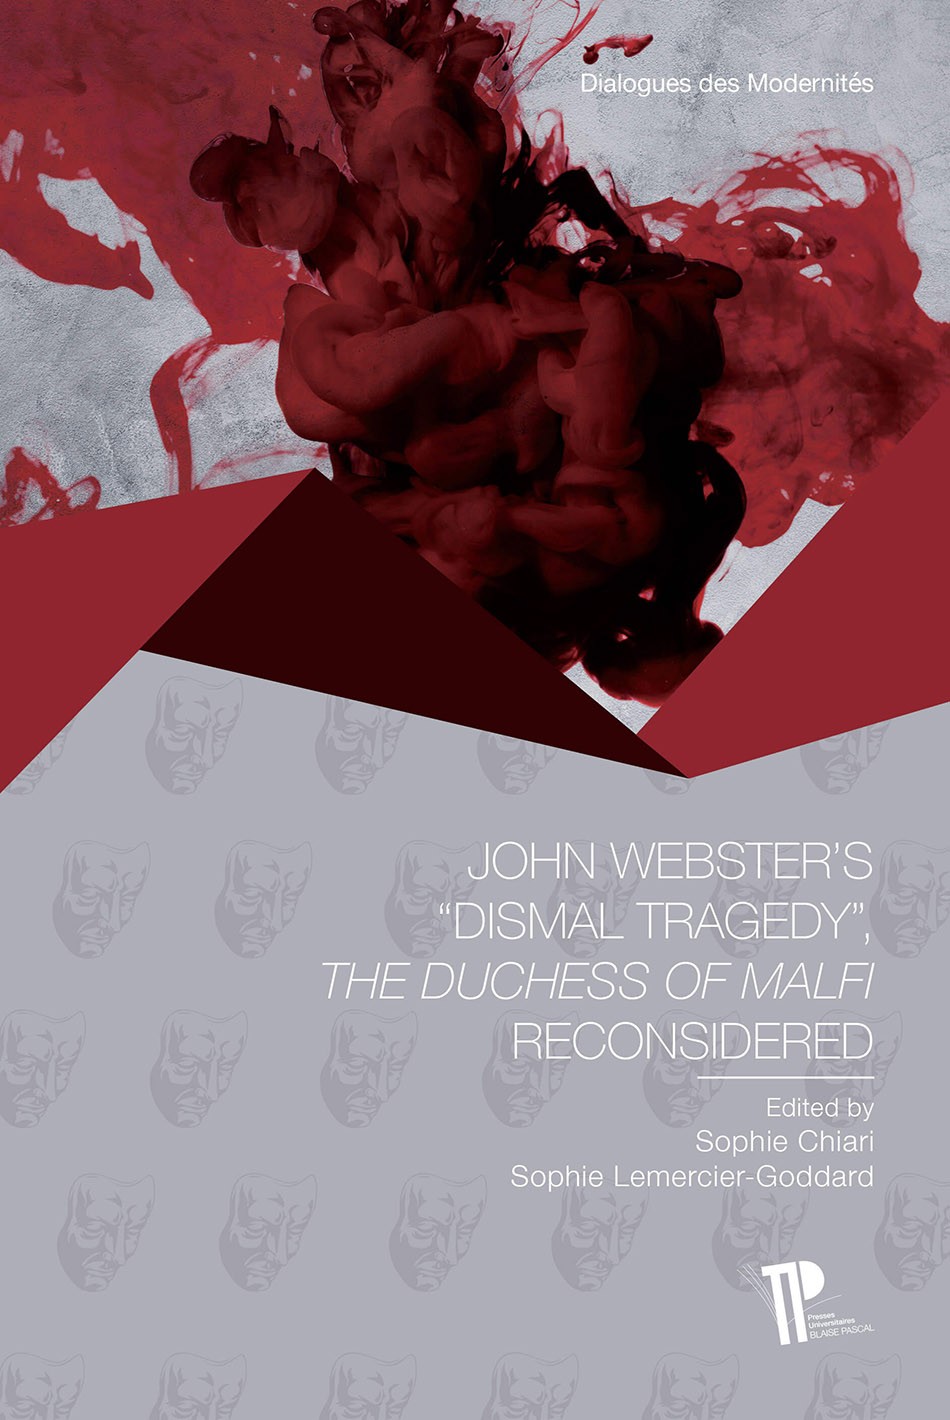 John Webster's 'Dismal Tragedy' The Duchess of Malfi Reconsidered